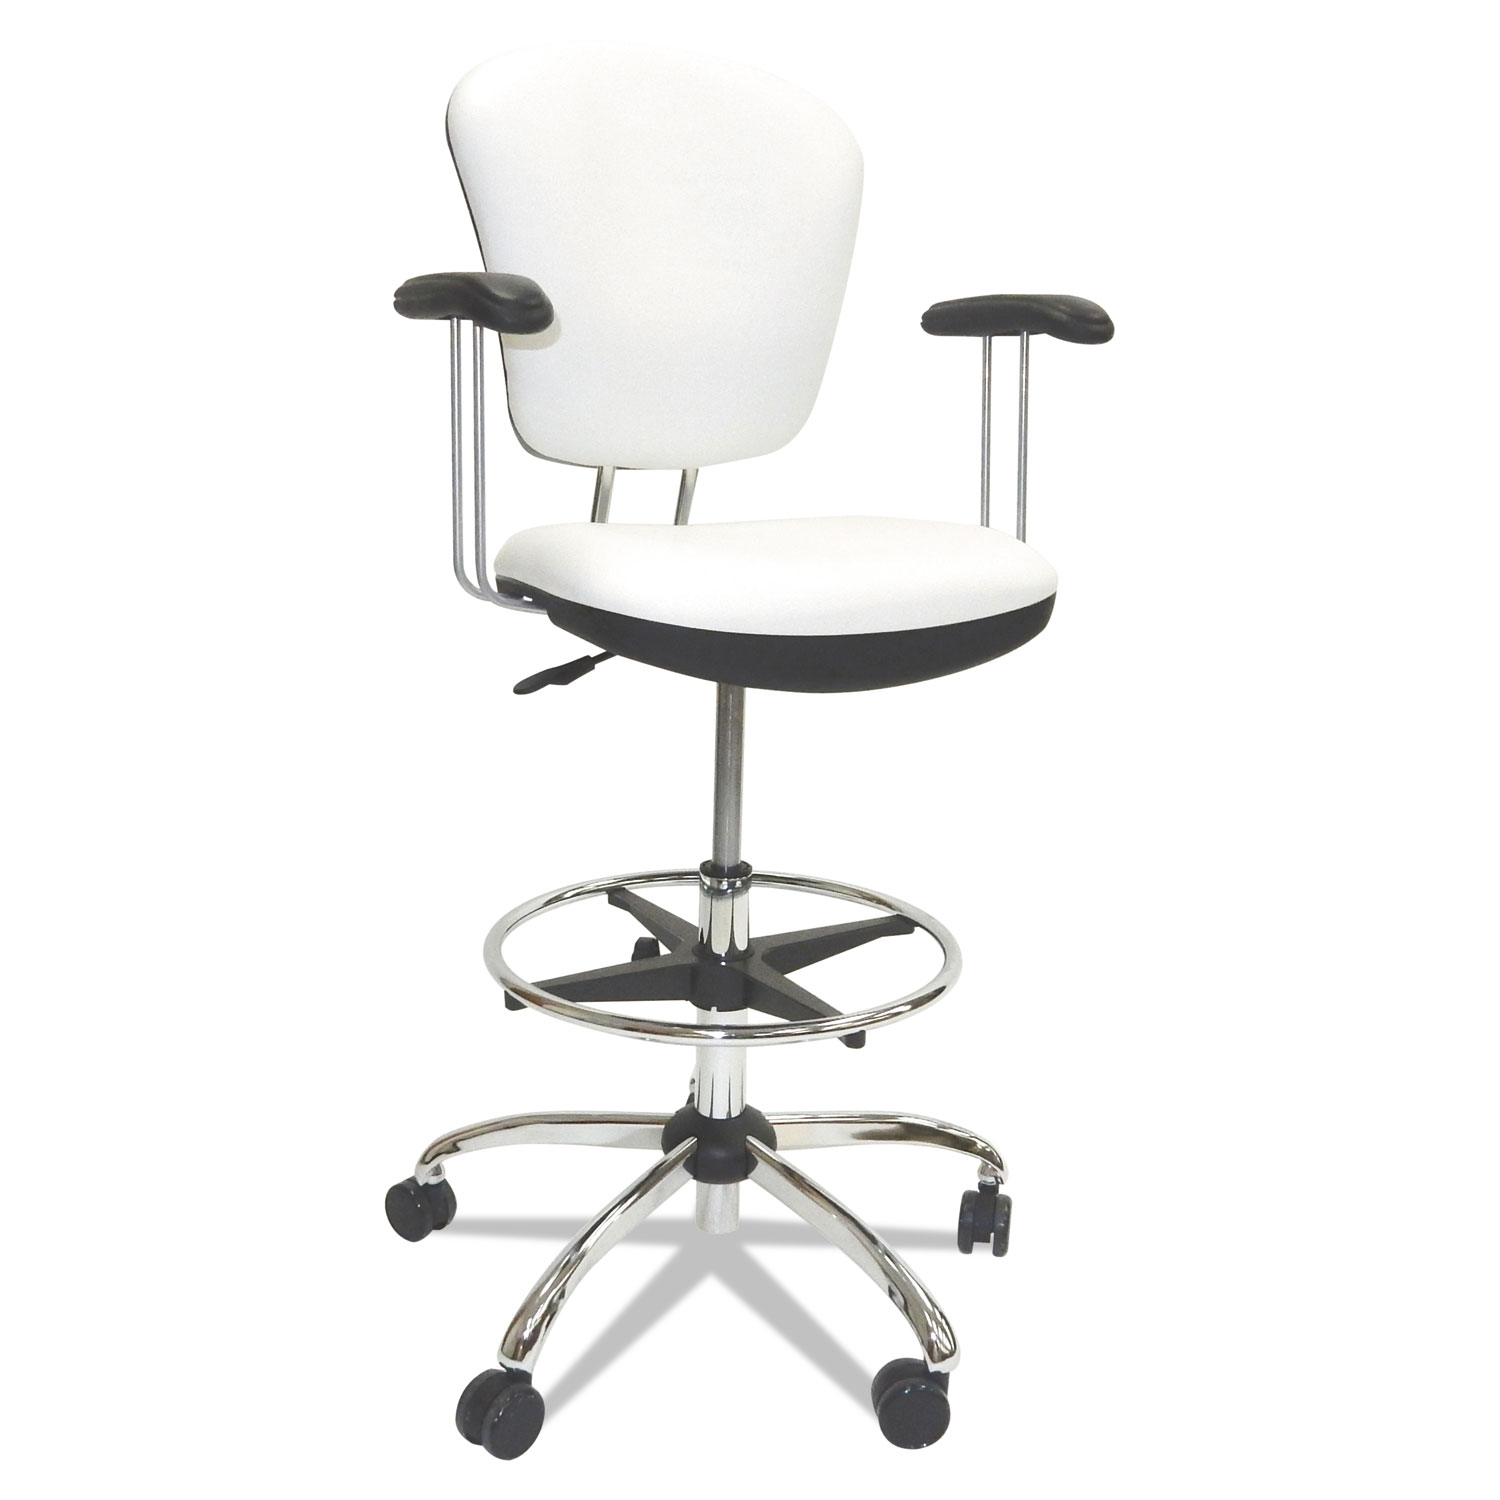  ShopSol 1010296 Lab and Healthcare Seating, 28 Seat Height, Supports up to 300 lbs., White Seat/White Back, Chrome Base (SSX1010296) 